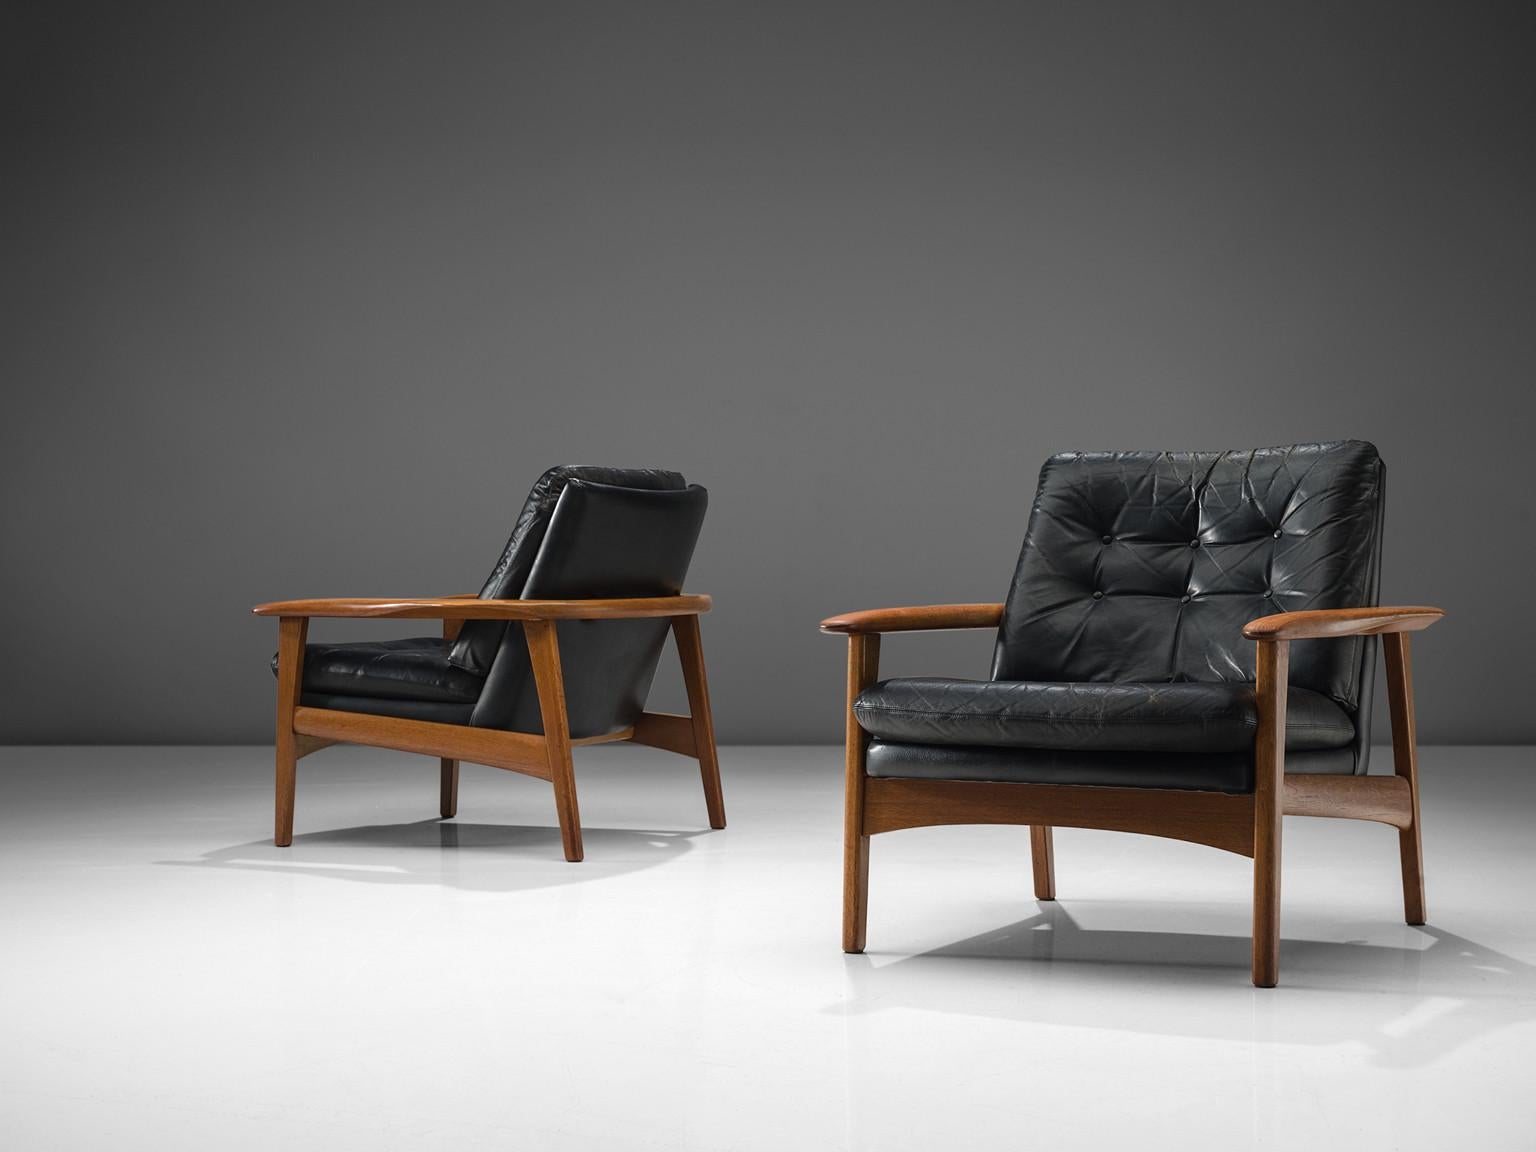 Pair of easy chairs, black leather and teak, Denmark, 1960s. 

This set of club like easy chairs feature a teak frame with and a tufted back. The chairs are modest, and their prime feature is their comfortable leather shell. The tufted seat and back